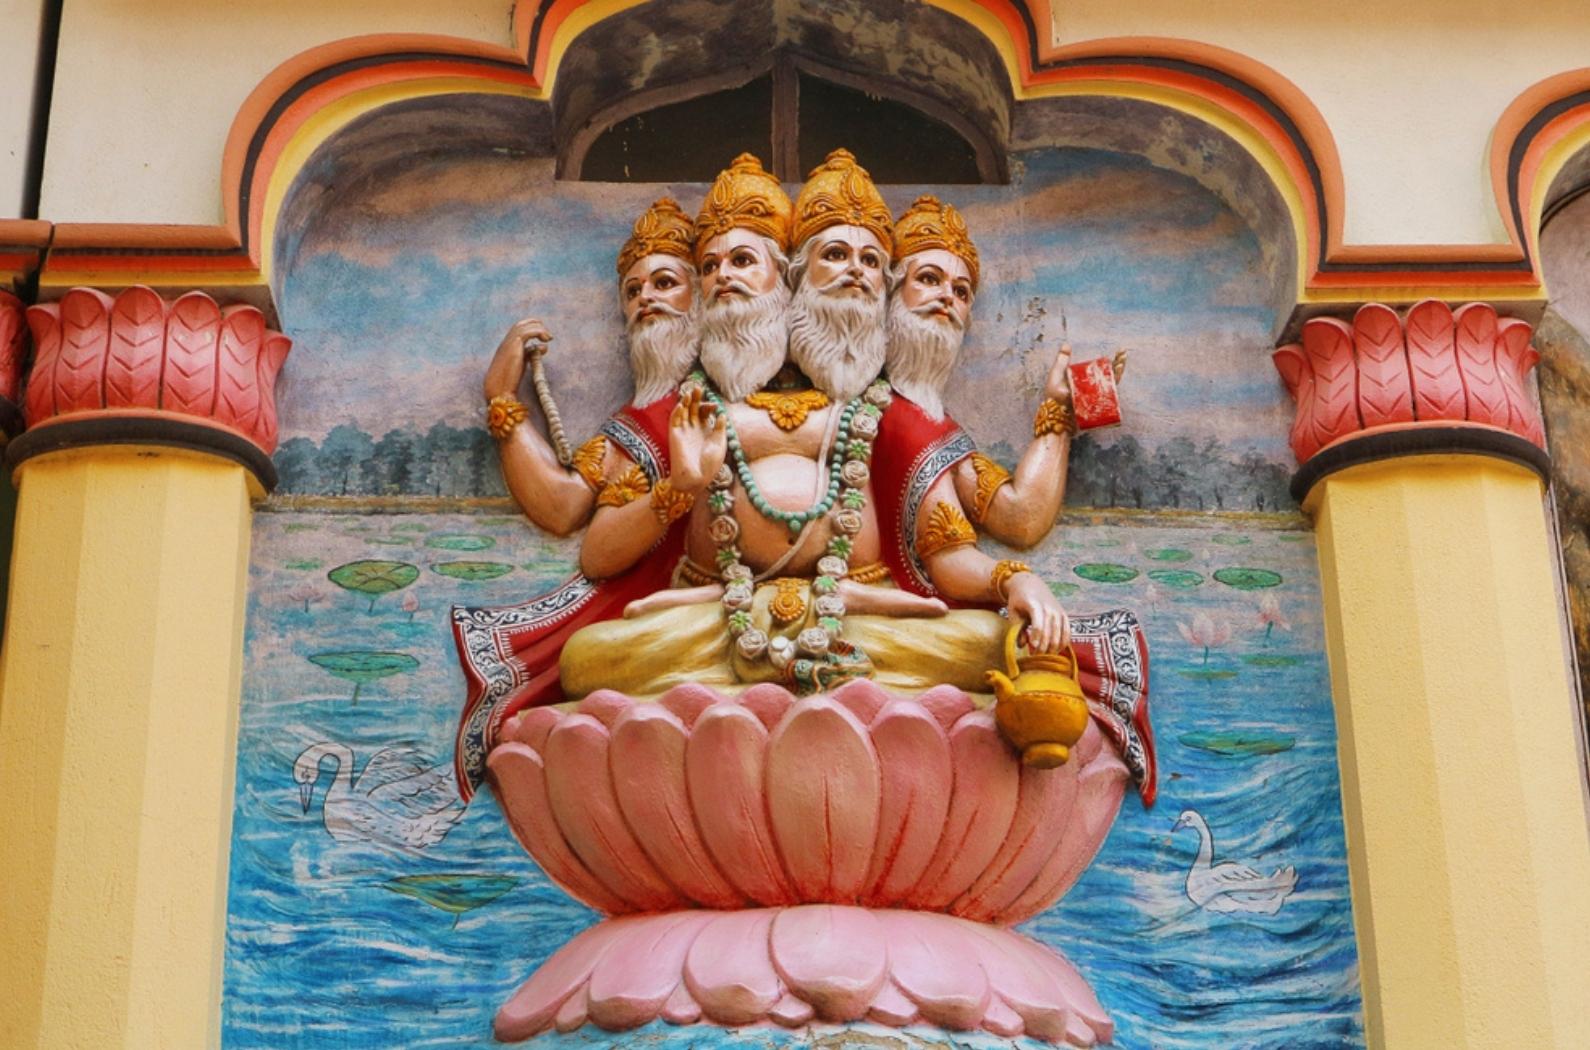 View of wall art of Hindu god Brahma. Brahma, the four-headed lord, sits on a lotus flower. Religious image on the temple in India.